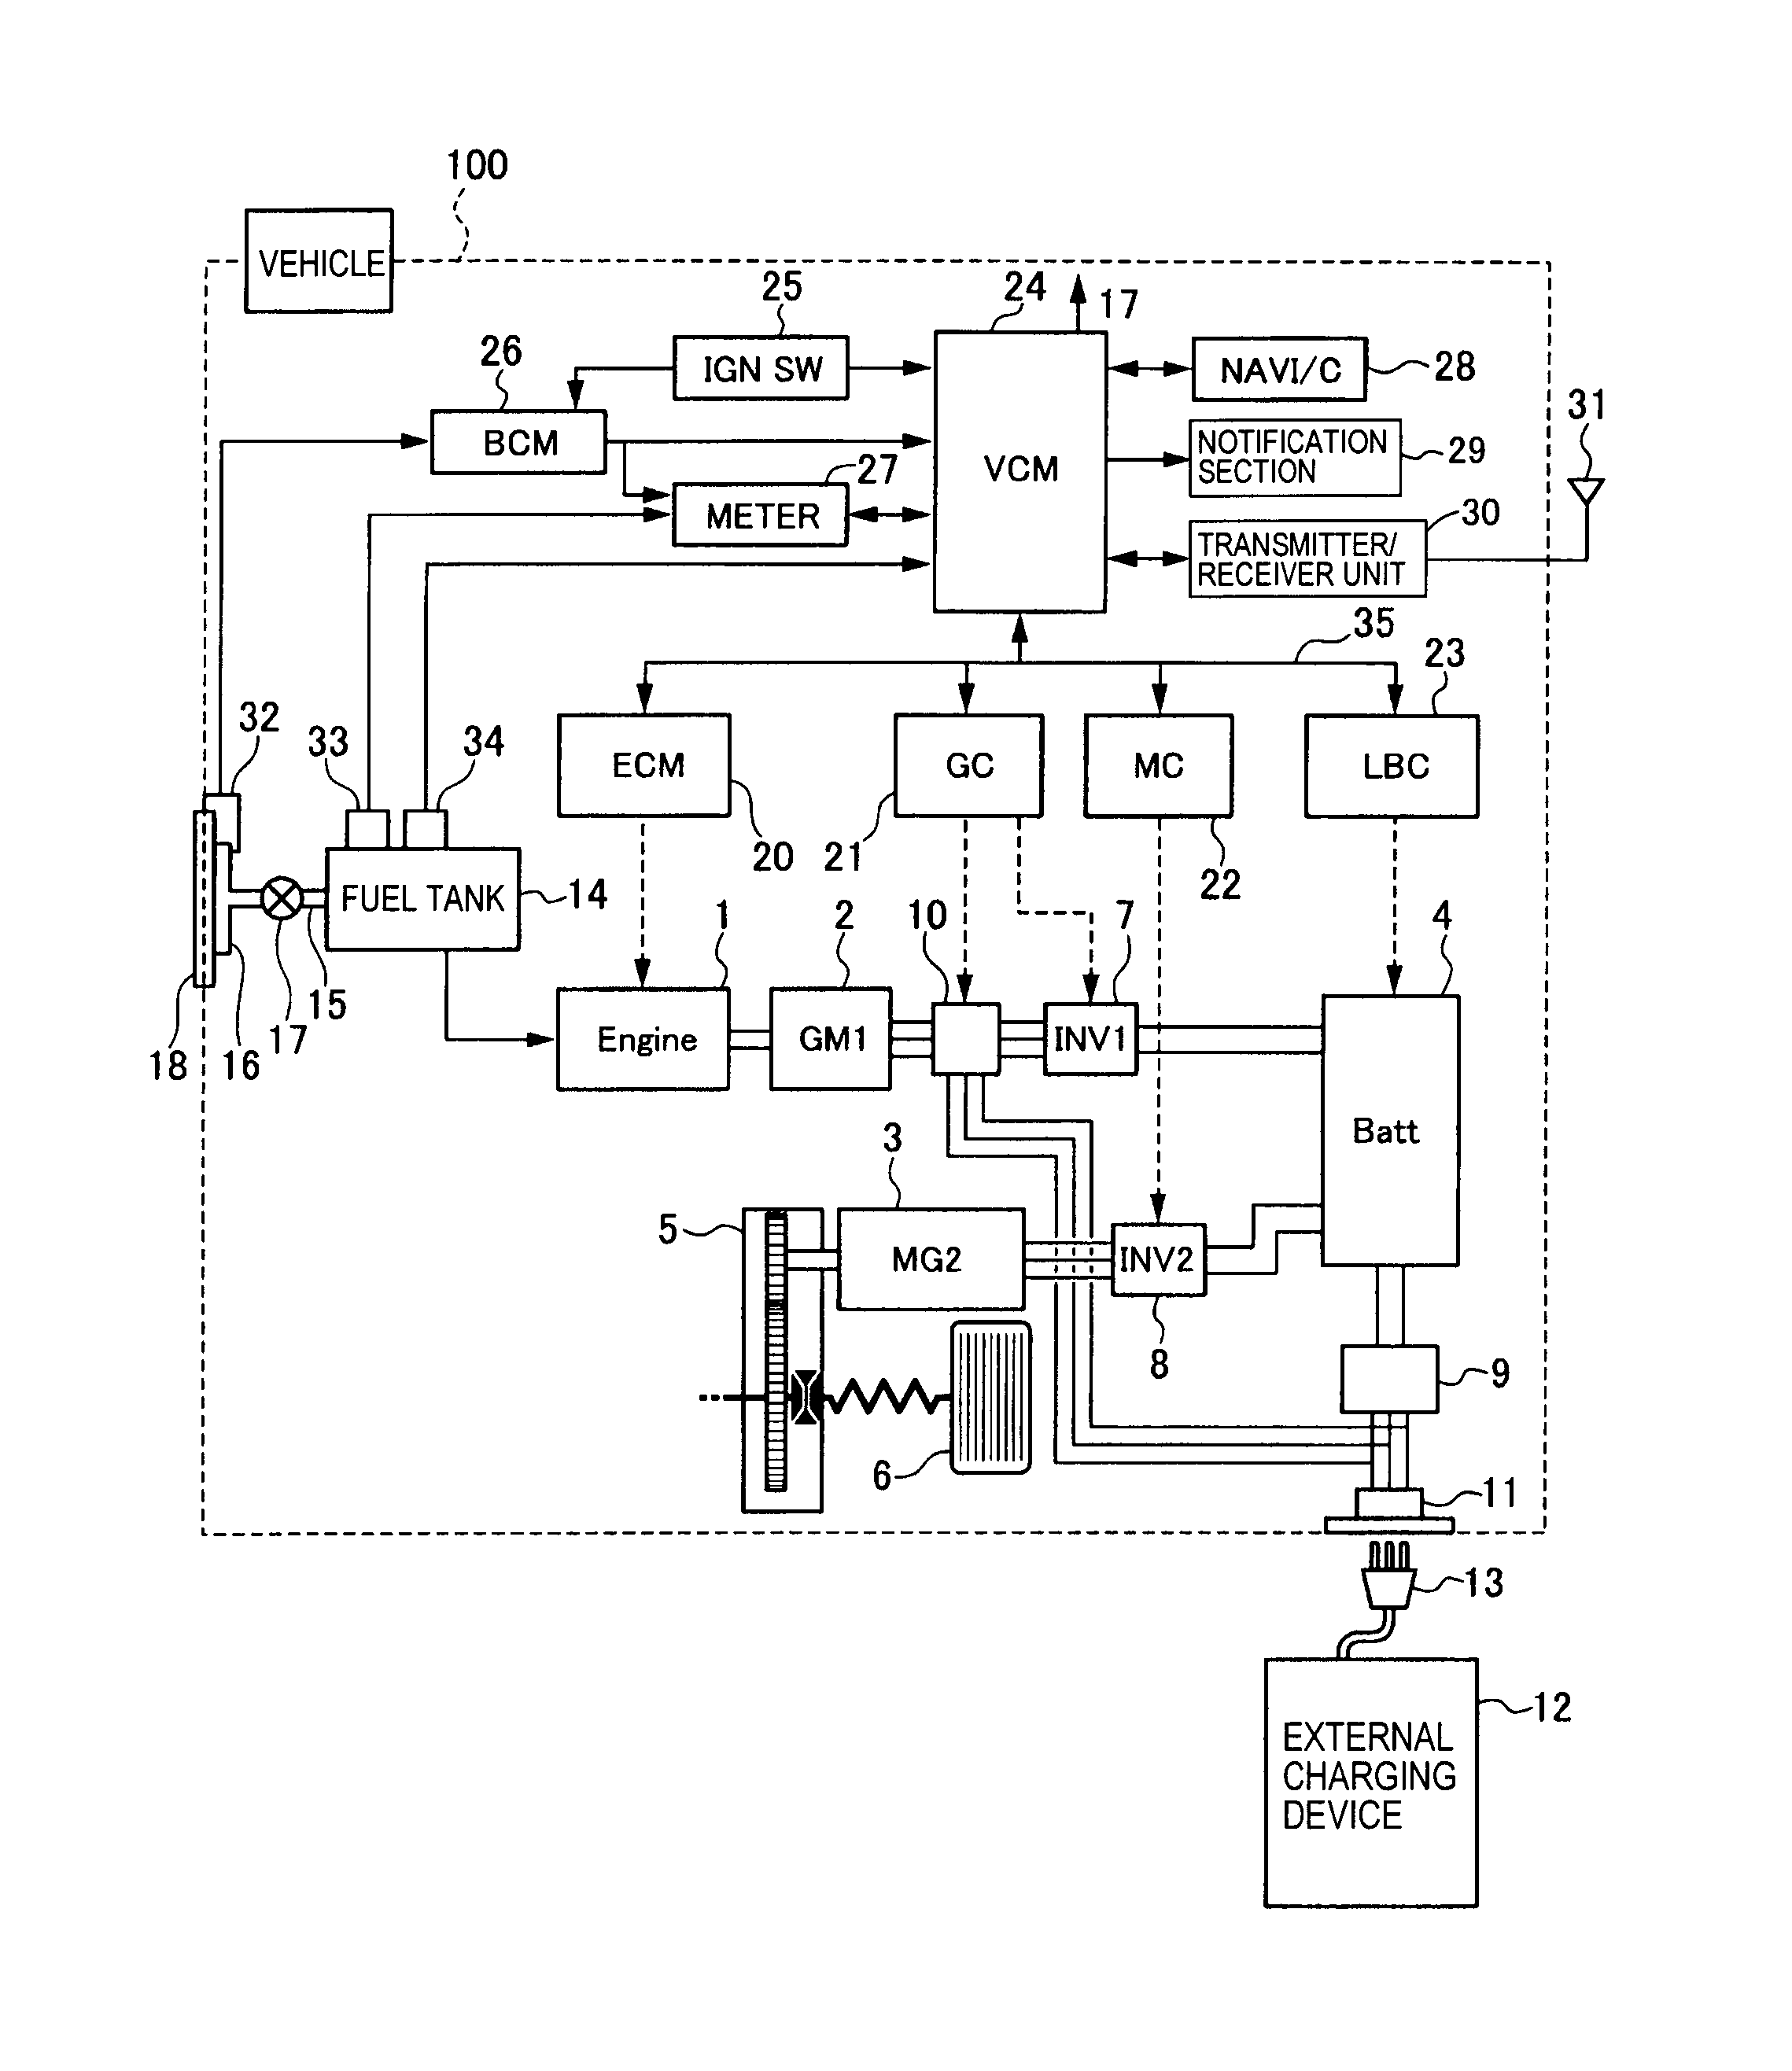 switch wiring diagram for steel dragon 7090e